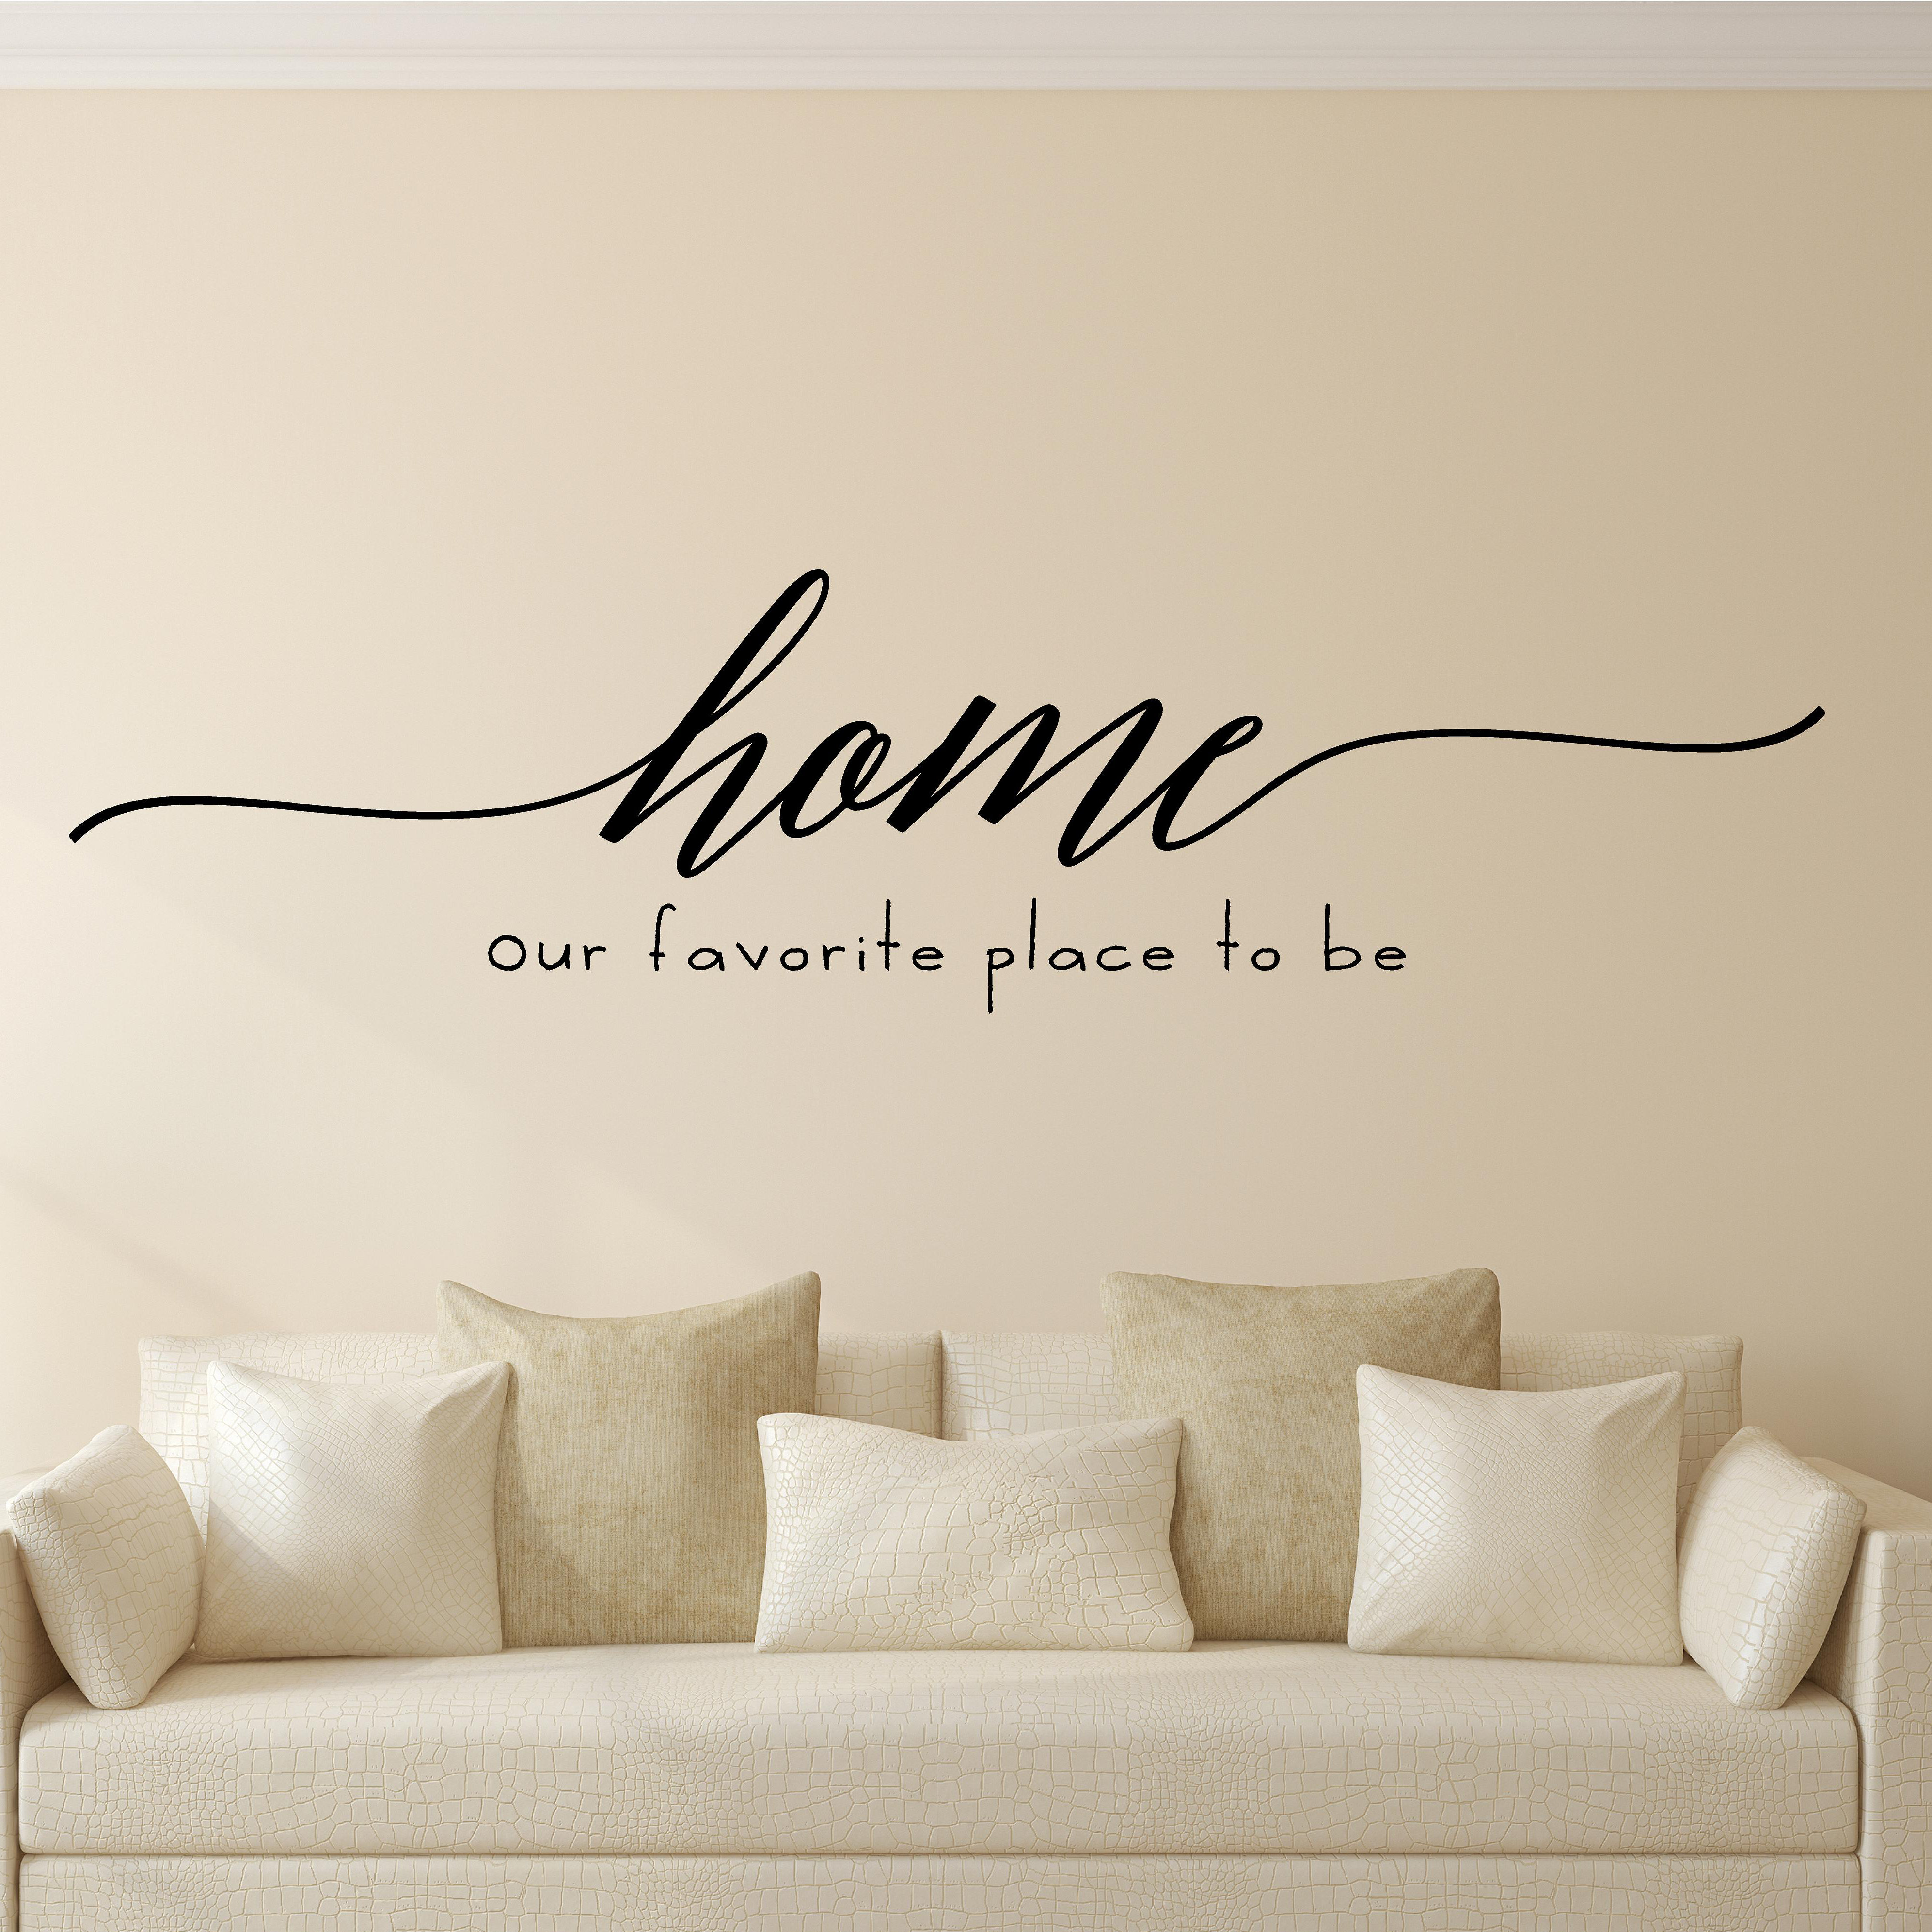 Small Homes Personalised Quality Vinyl Wall DecalSticker